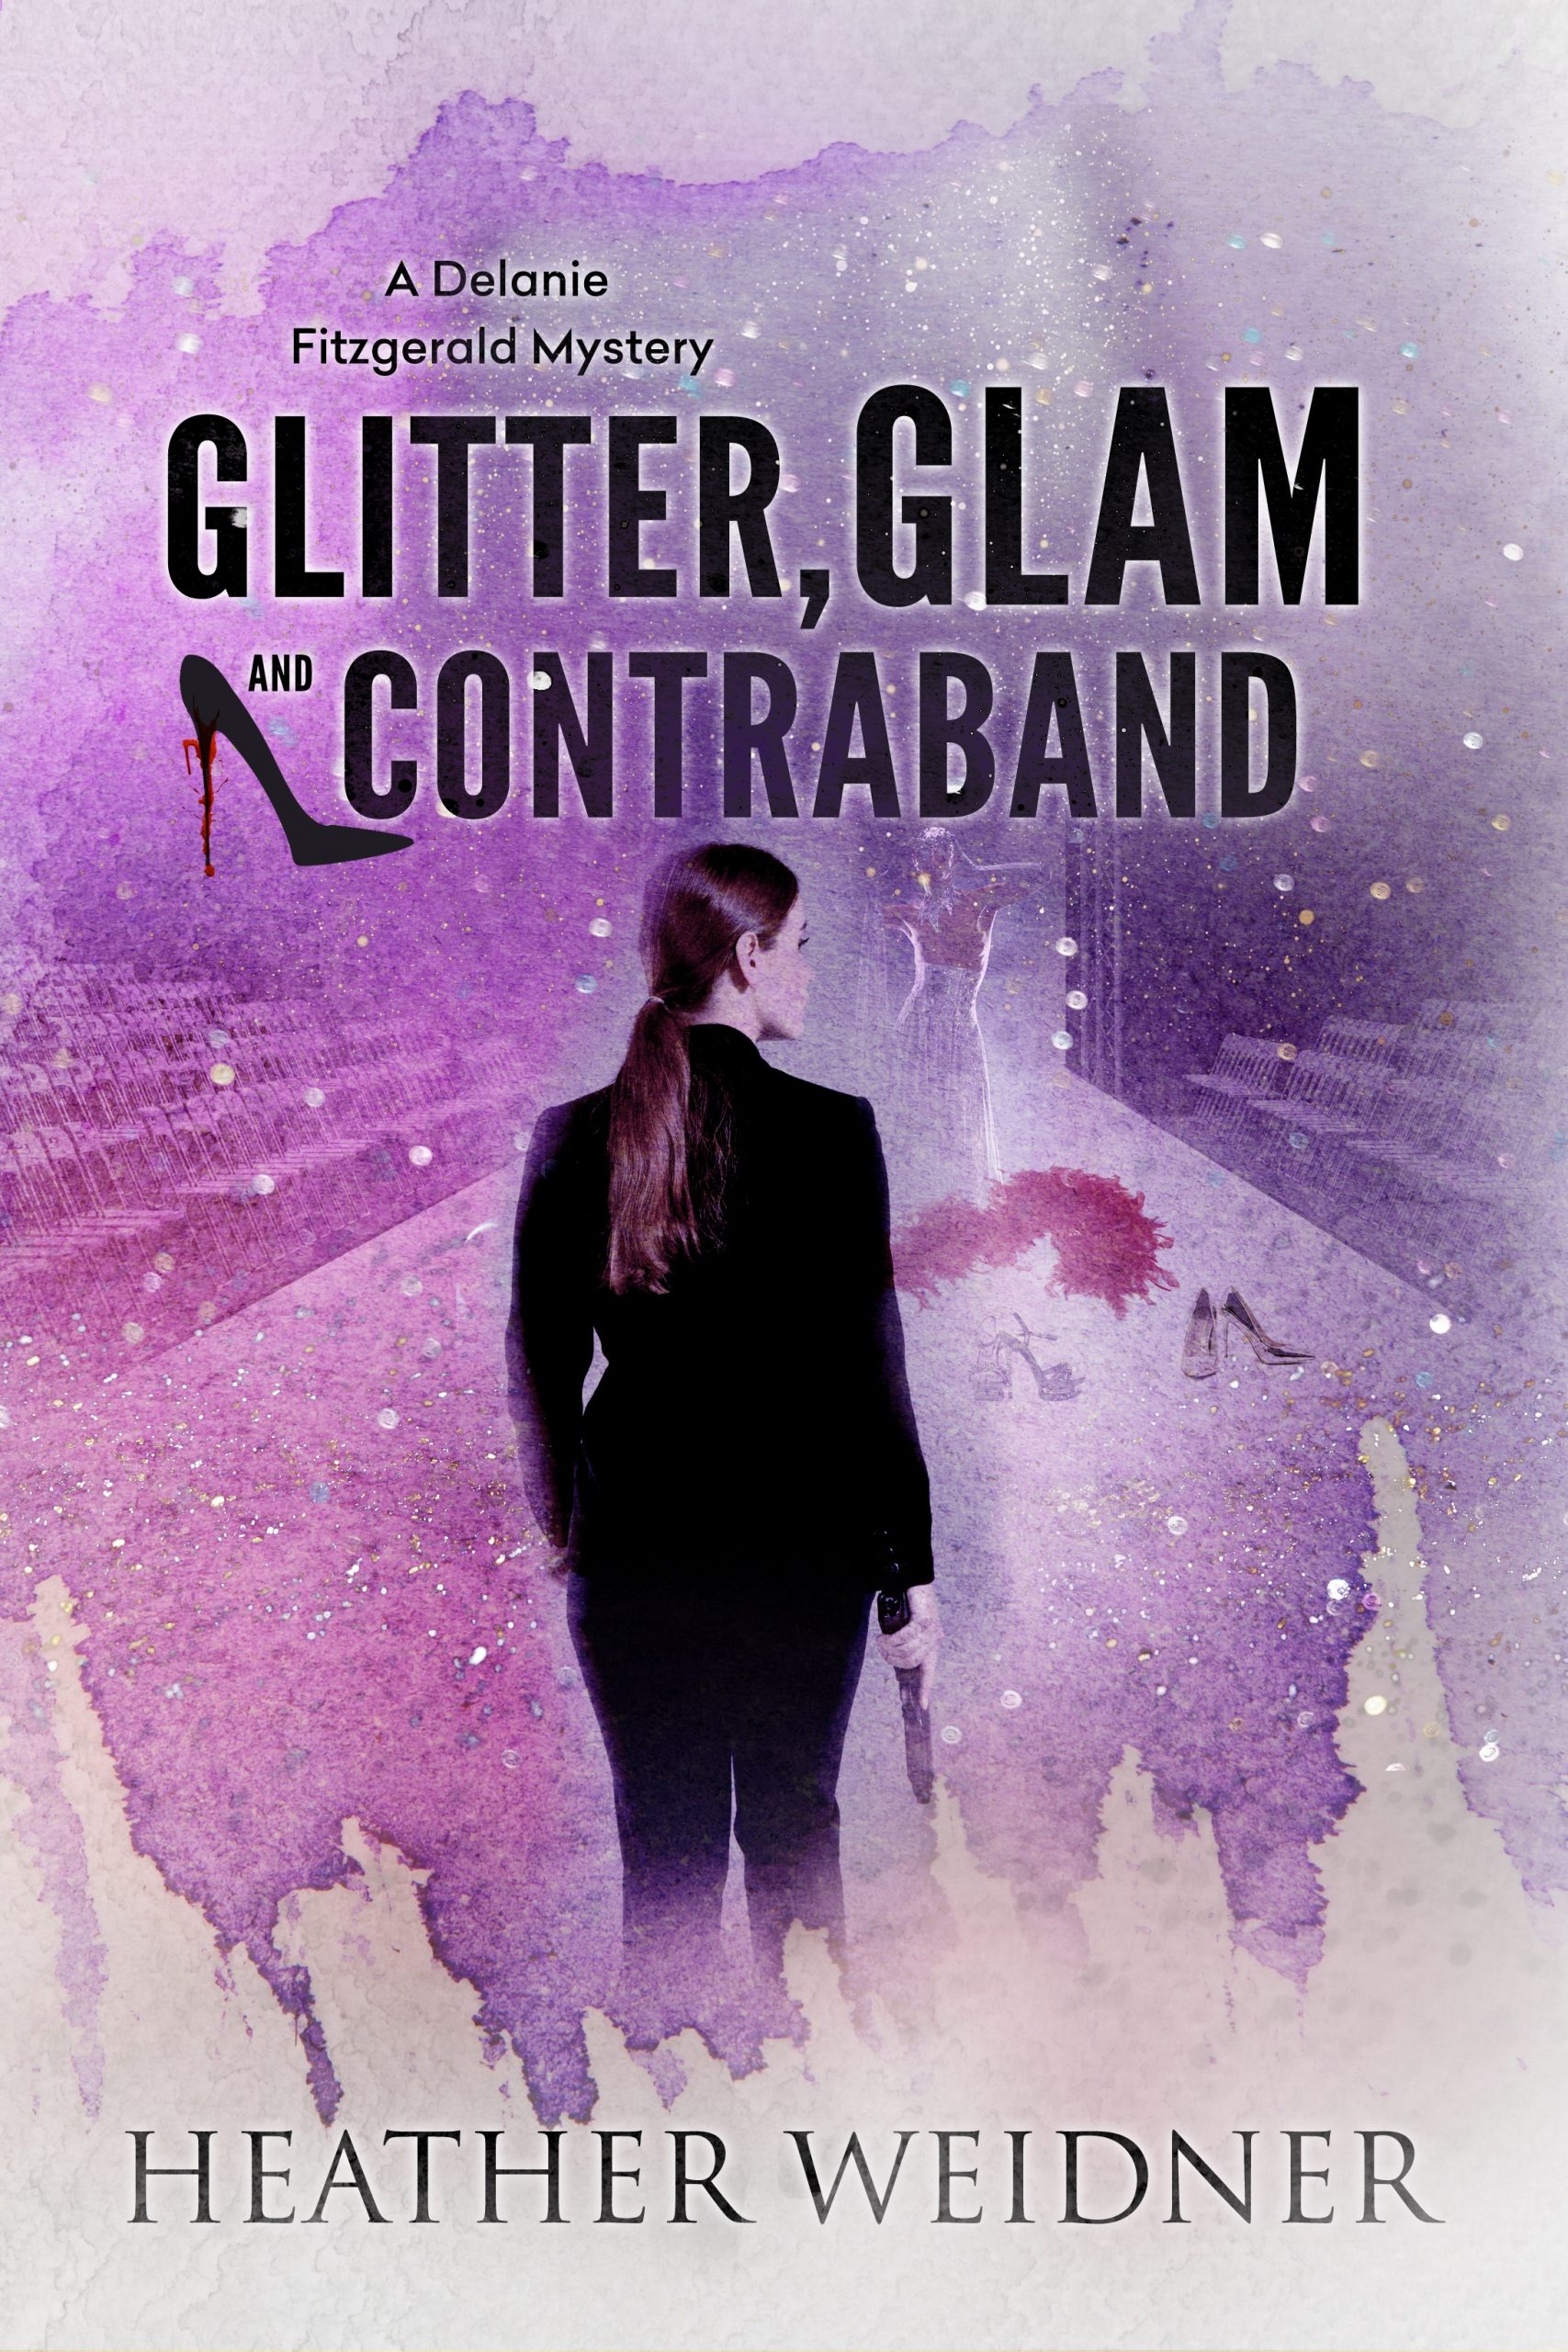 Glitter Glam & Contraband by Heather Leigh Weidner